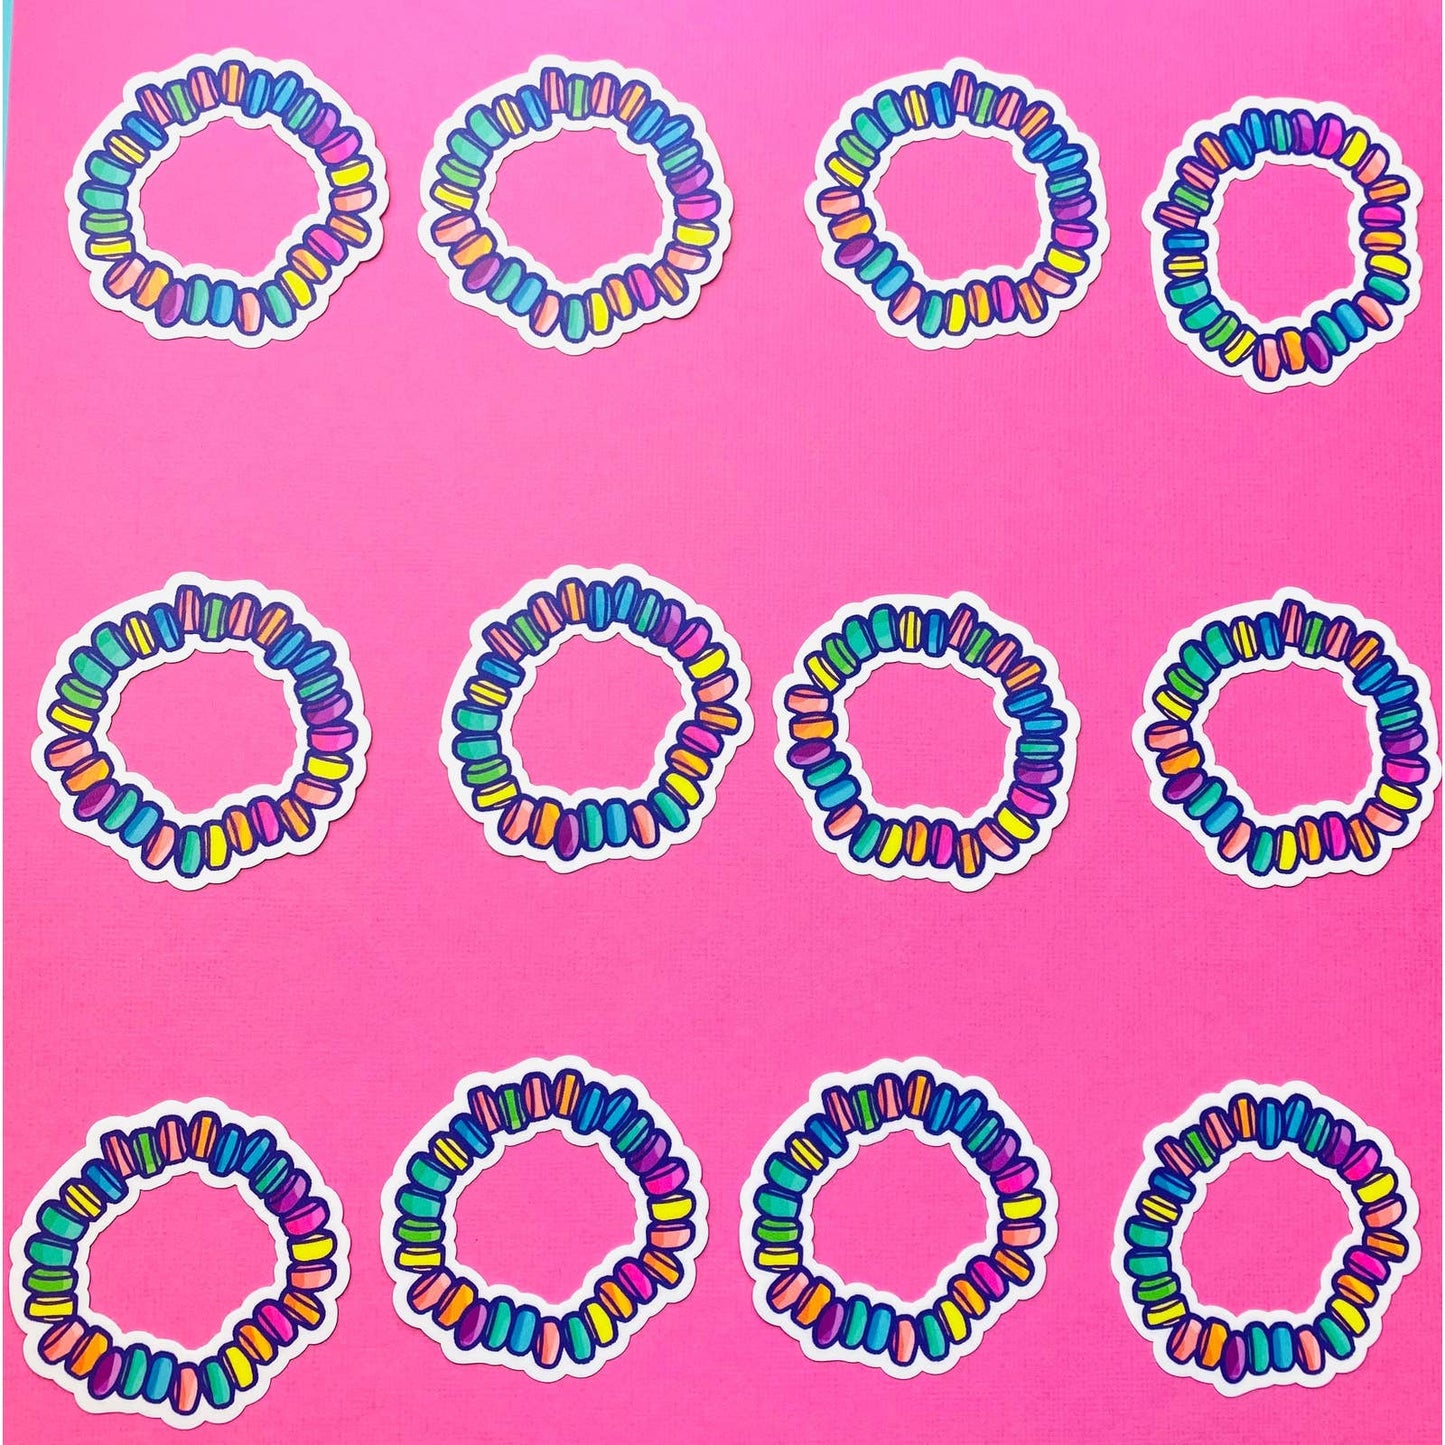 Candy Bracelet Sticker Candy Jewelry for 1980s 1990s Aesthetic Nineties Kids | Candy Necklace